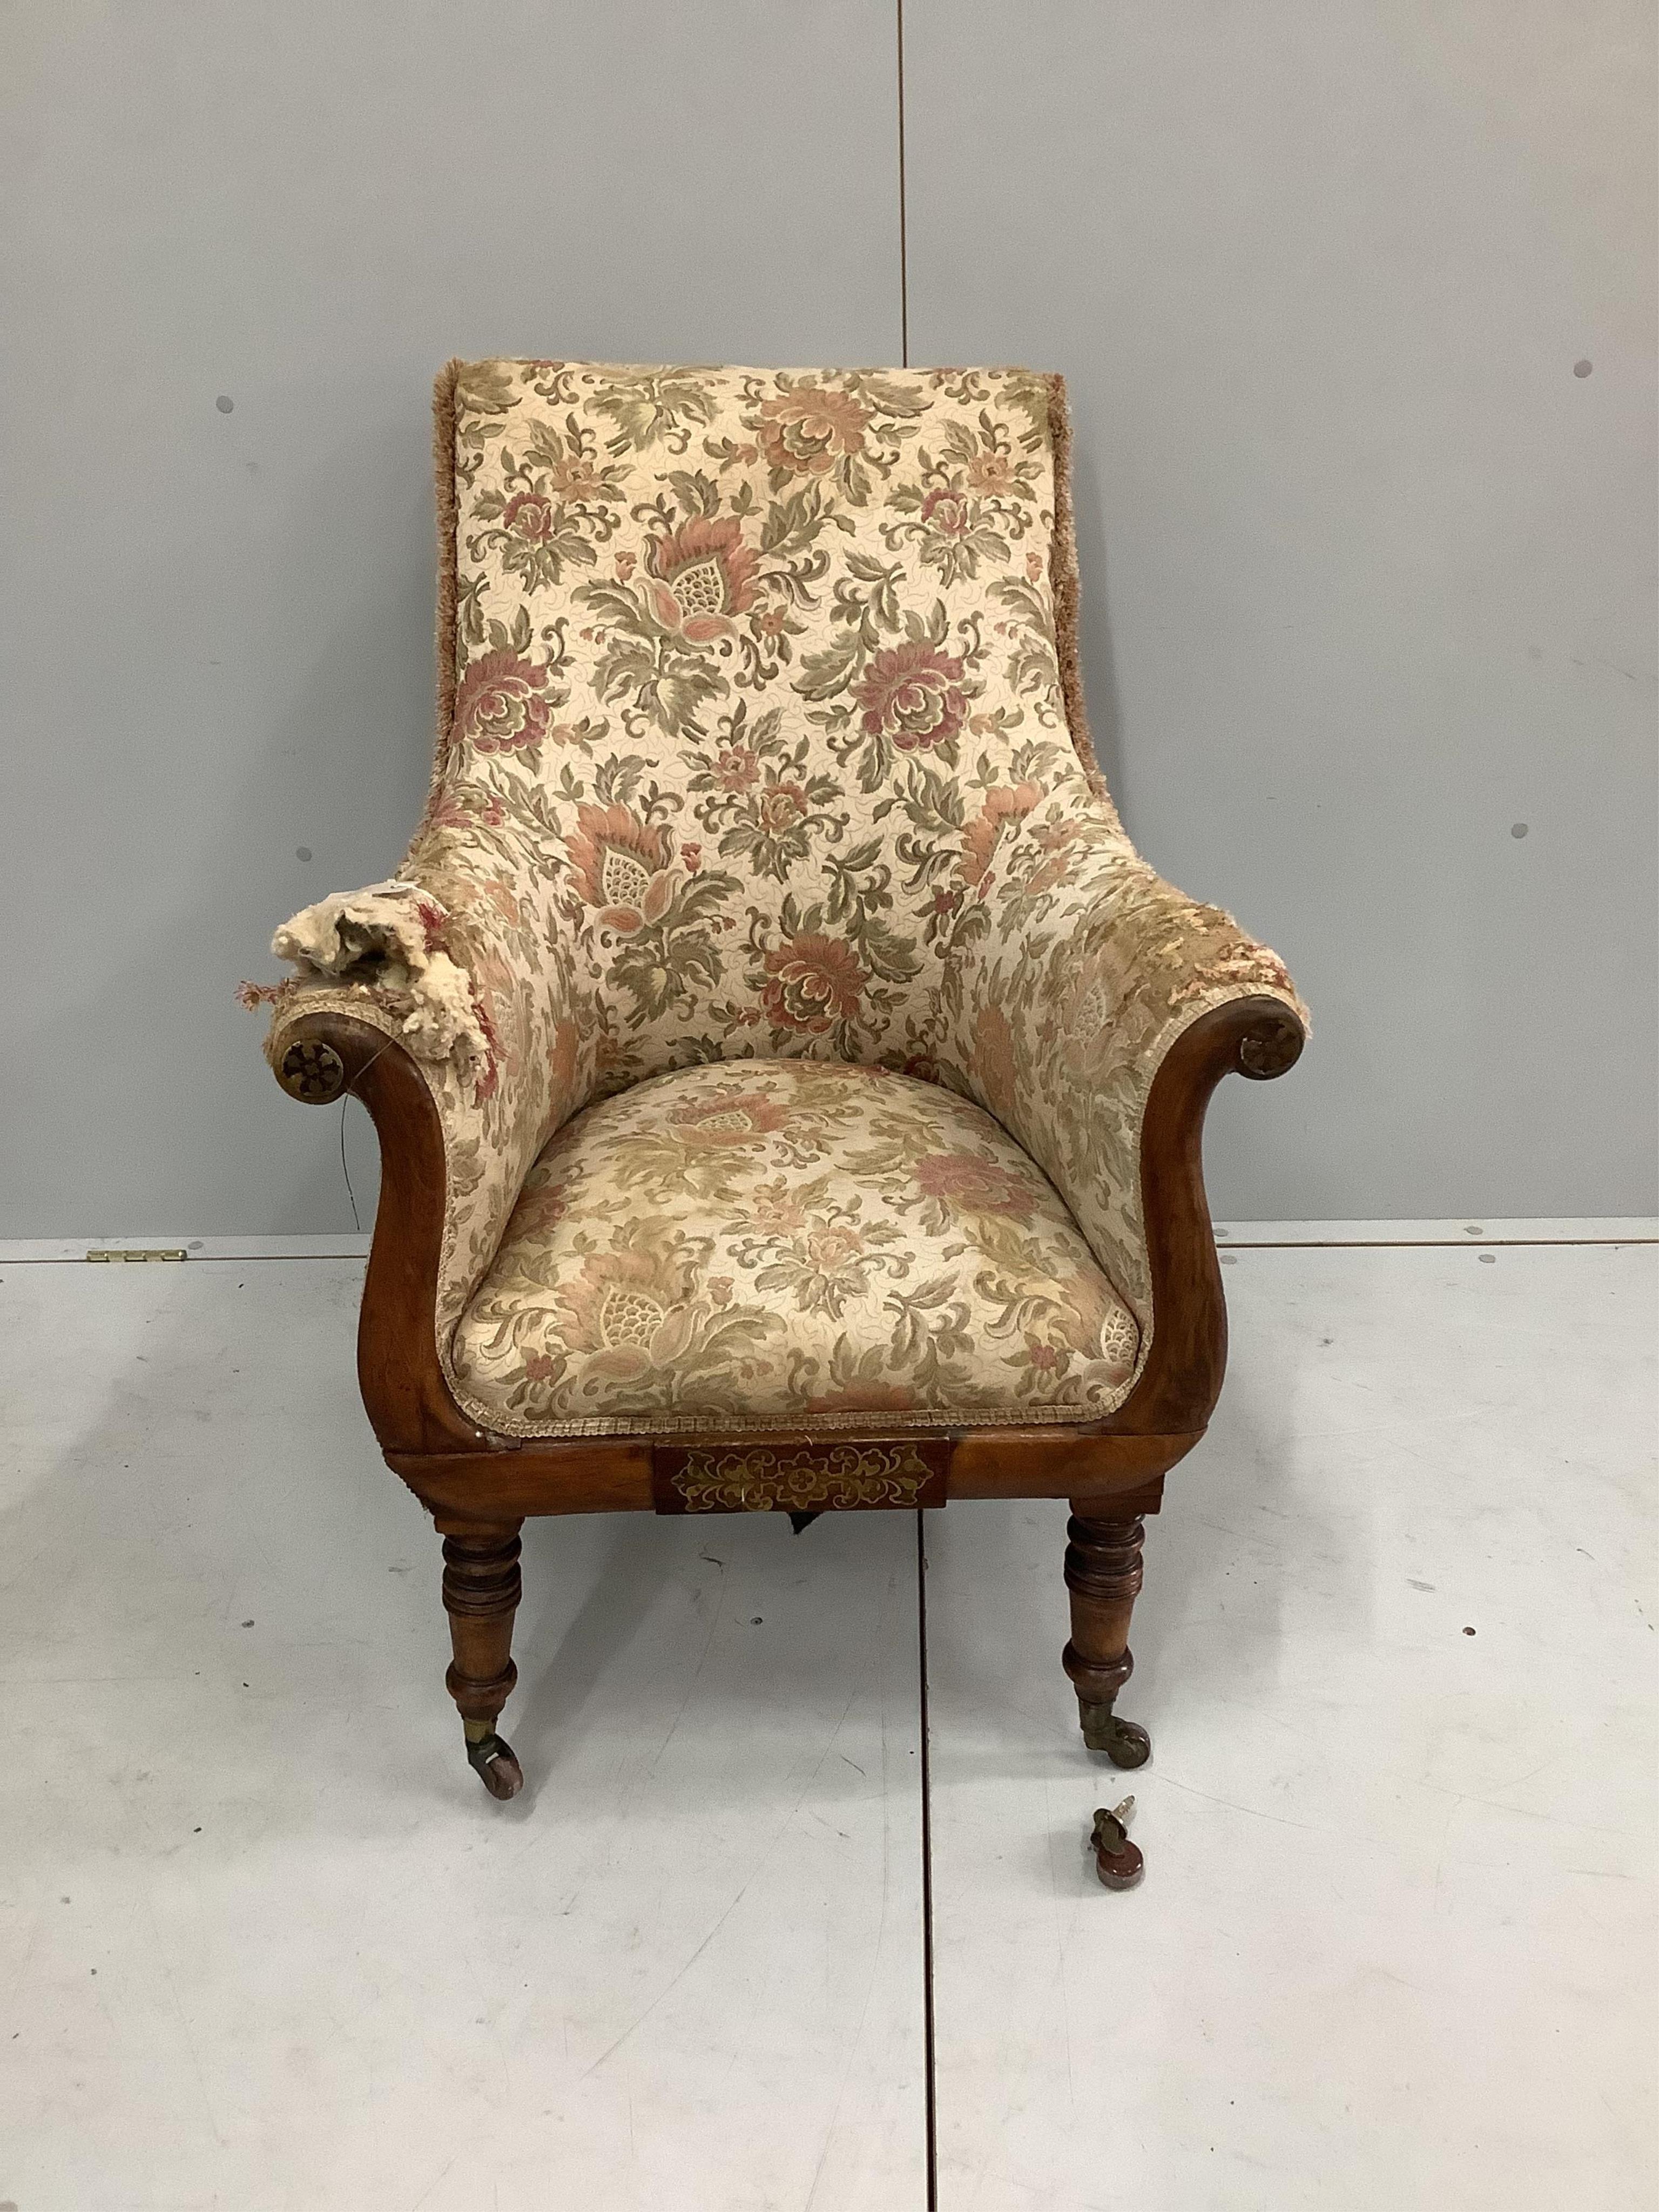 A Regency cut brass inlaid rosewood armchair, width 65cm, depth 70cm, height 92cm. Condition - poor to fair